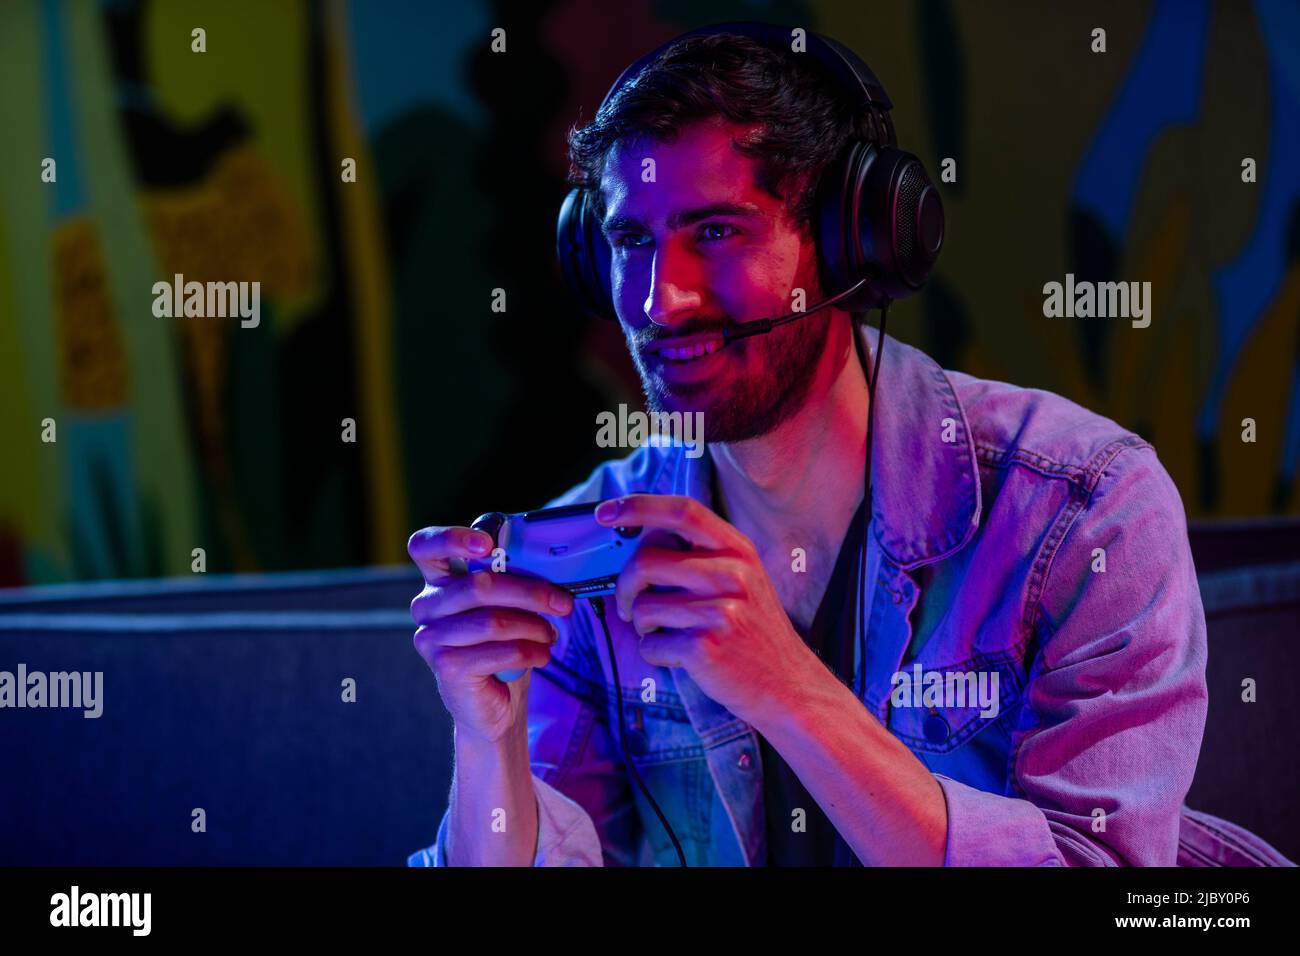 Video game streamer in his room with colored lights and game controller. Stock Photo